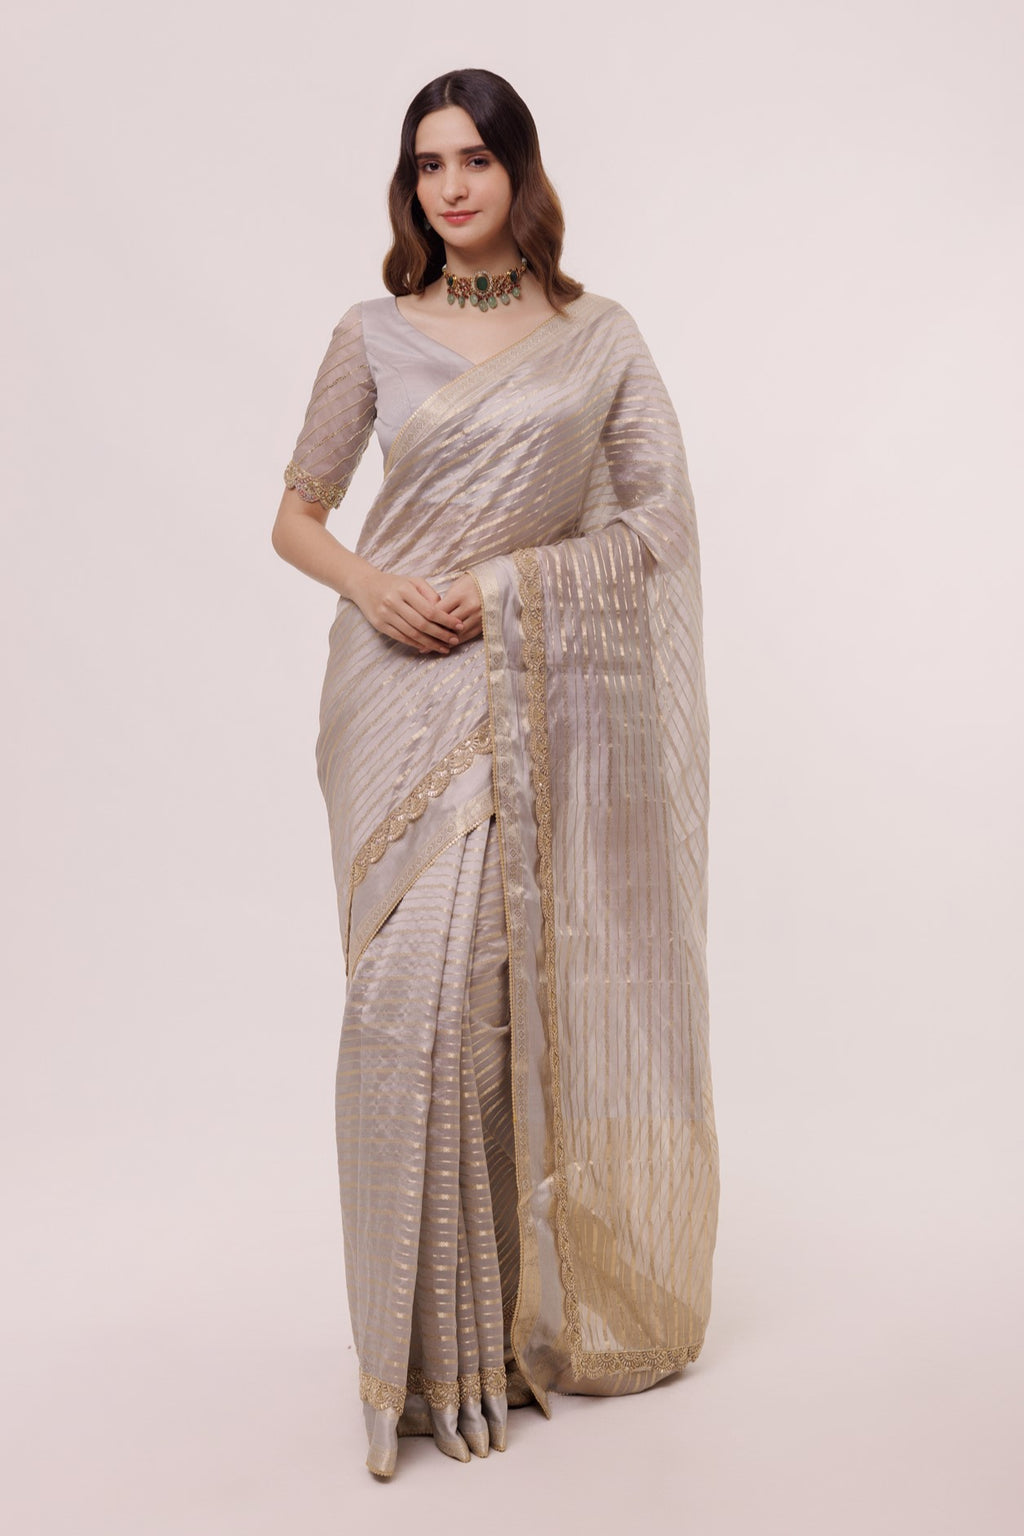 Shop a Grey handloom saree with stripes all over the body and embellished edges. It comes with a half sleeve grey blouse. Embellishments include cheed, tikki, and cutdana. Shop designer saris online in the USA from Pure Elegance.